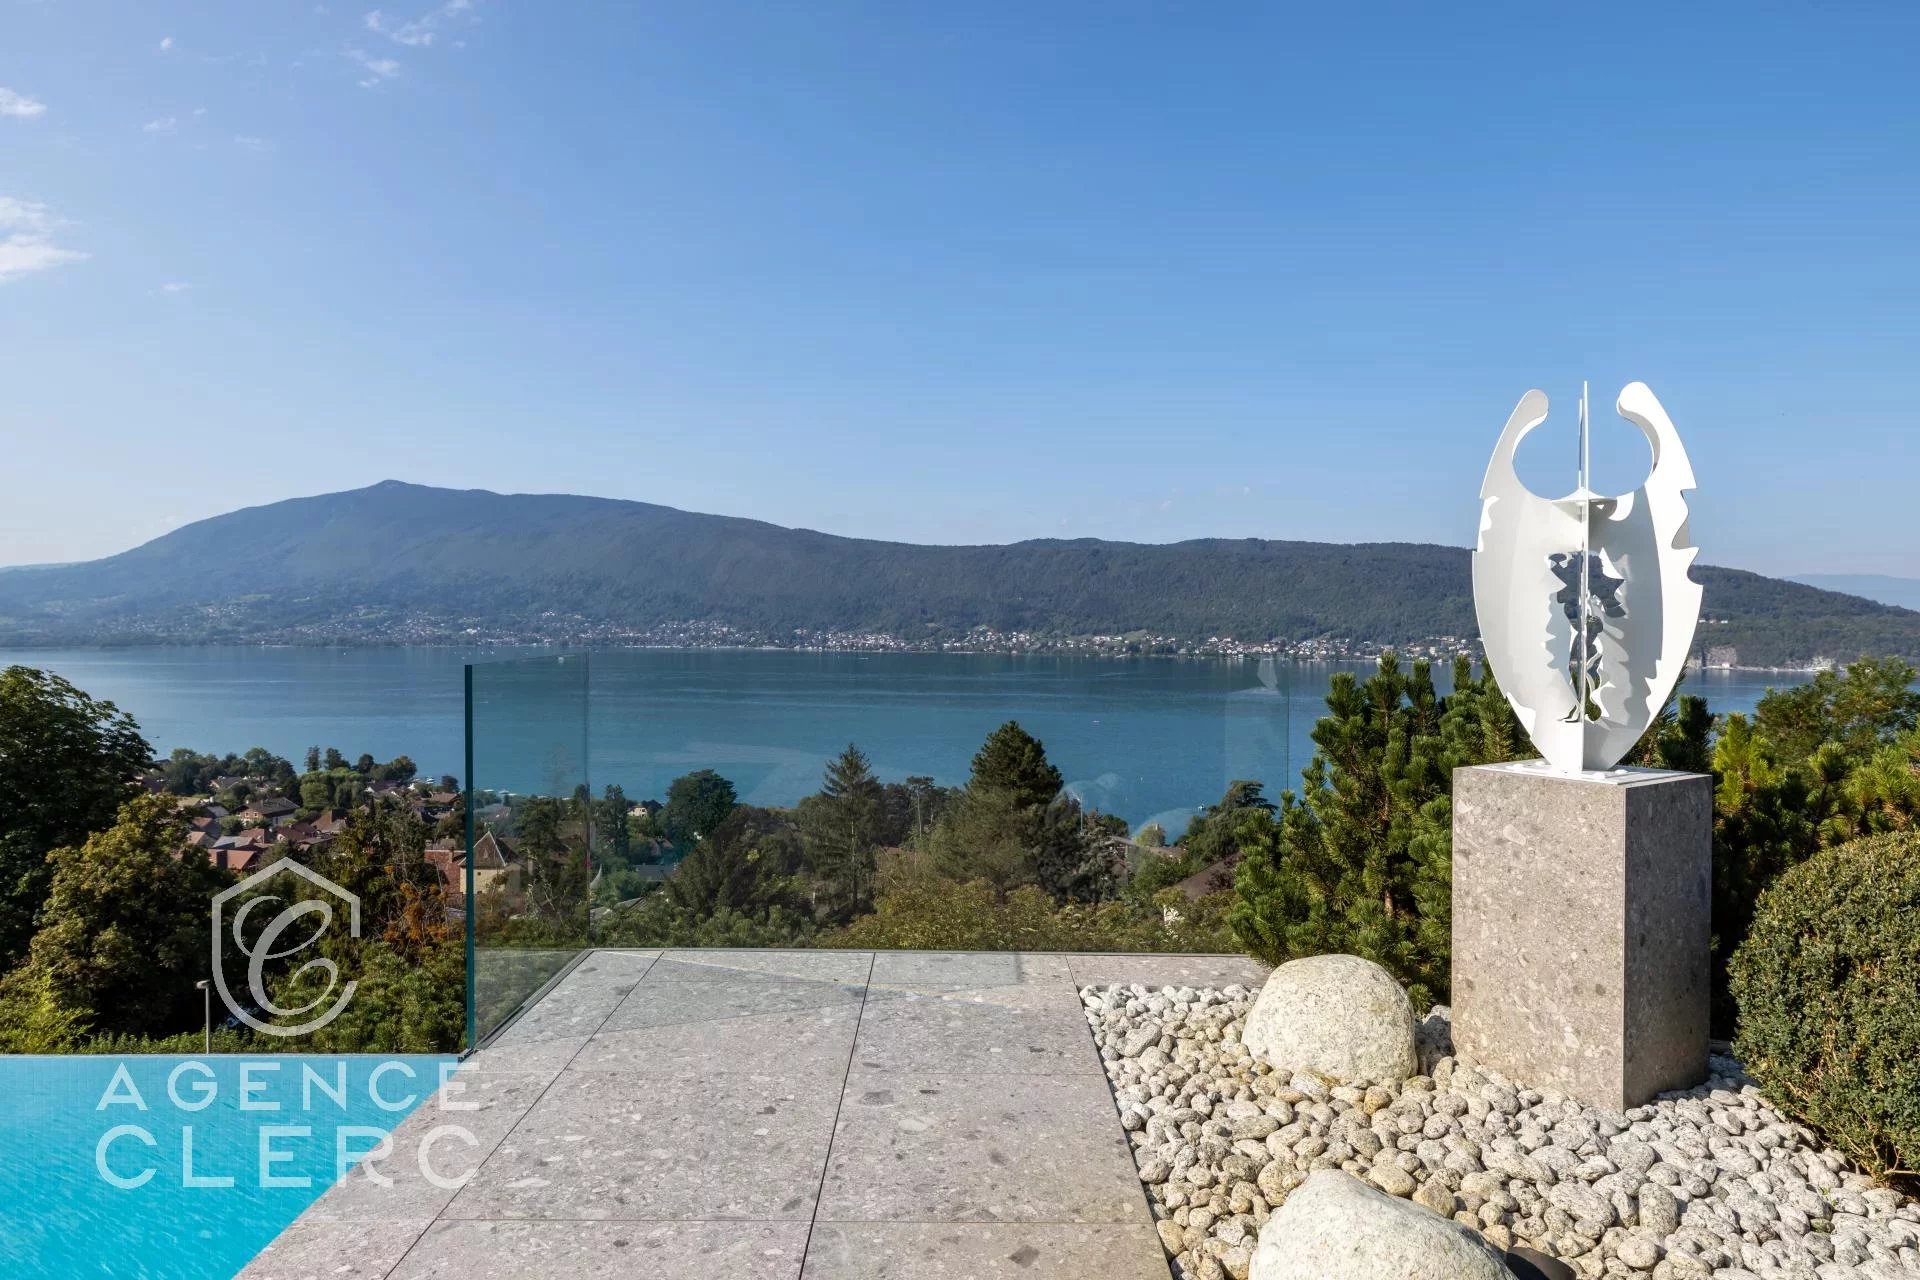 Veyrier du lac, property with panoramic view of the lake_1756